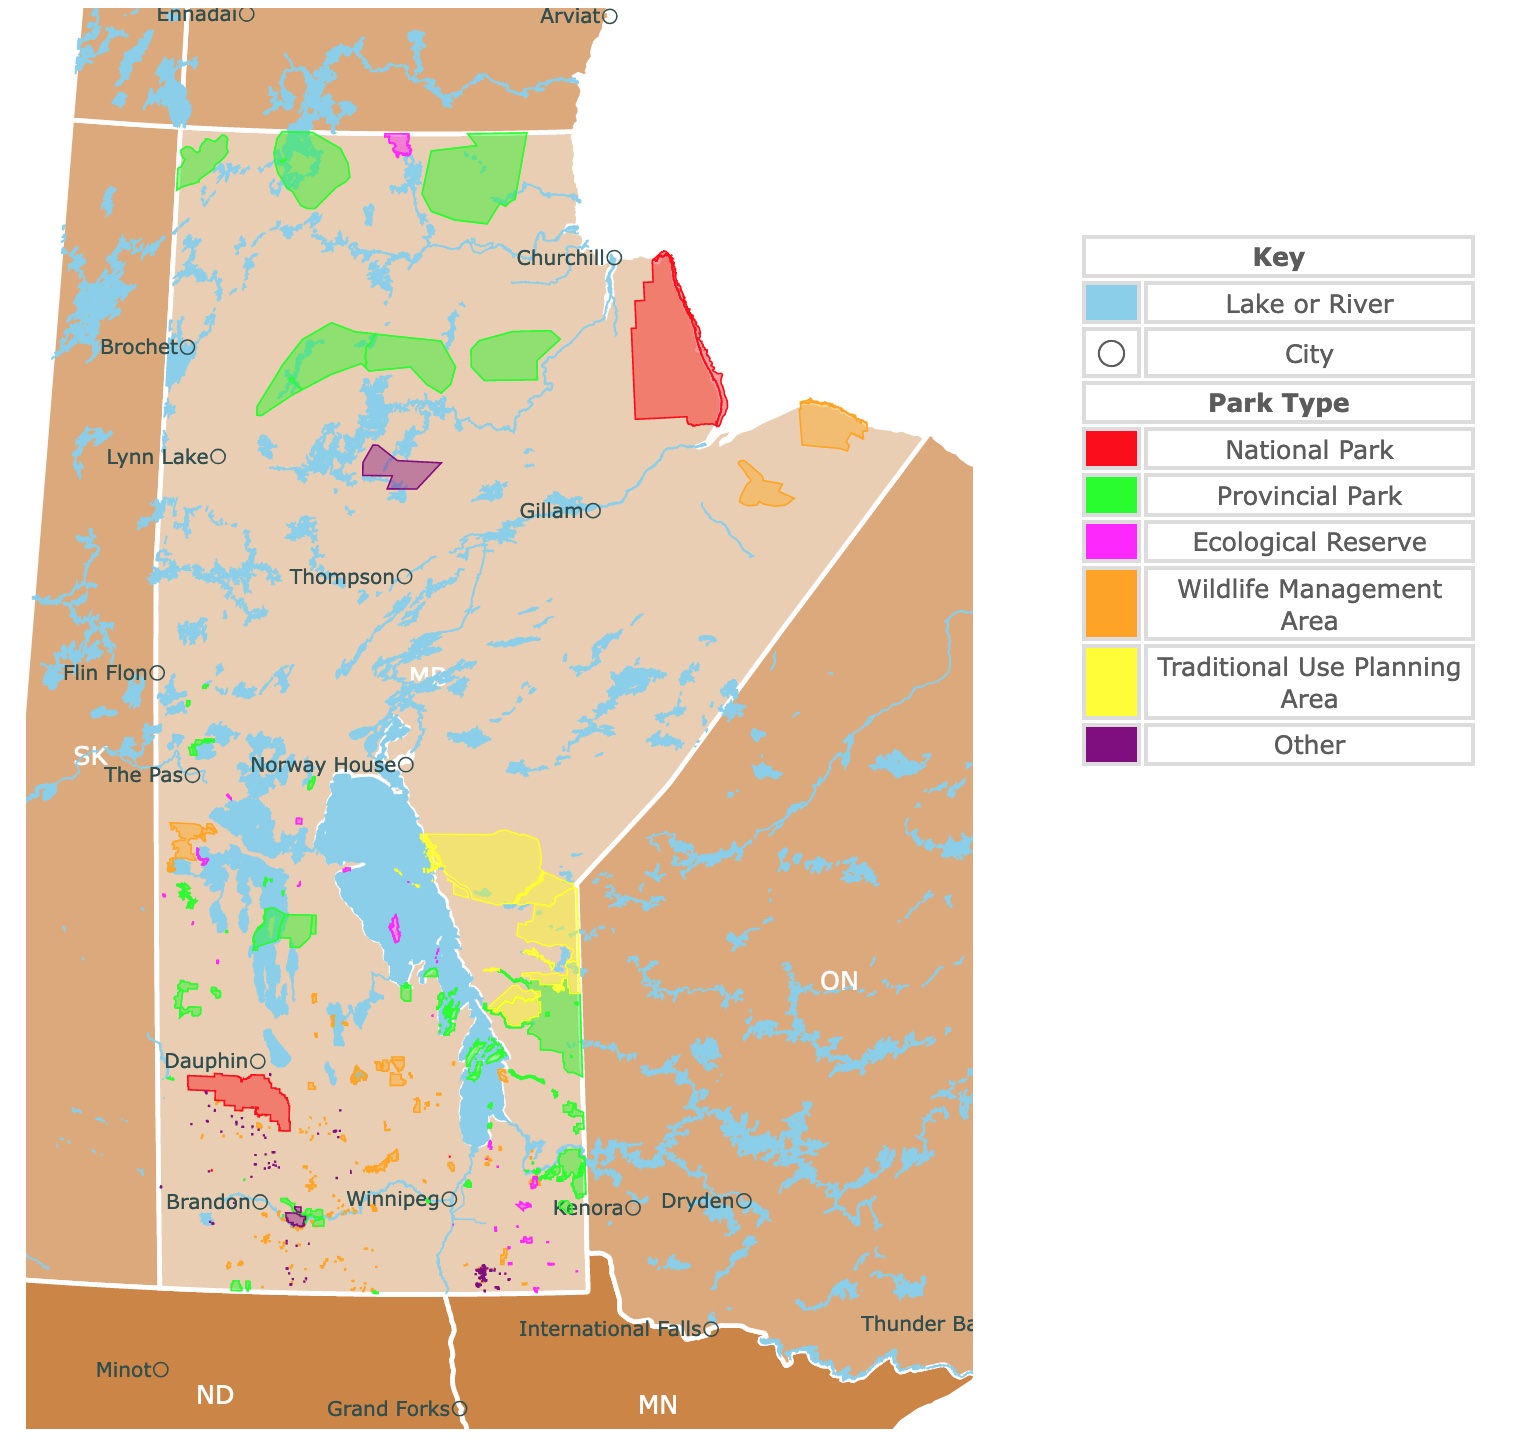 Map of Manitoba's provincial parks, national parks, and natural areas